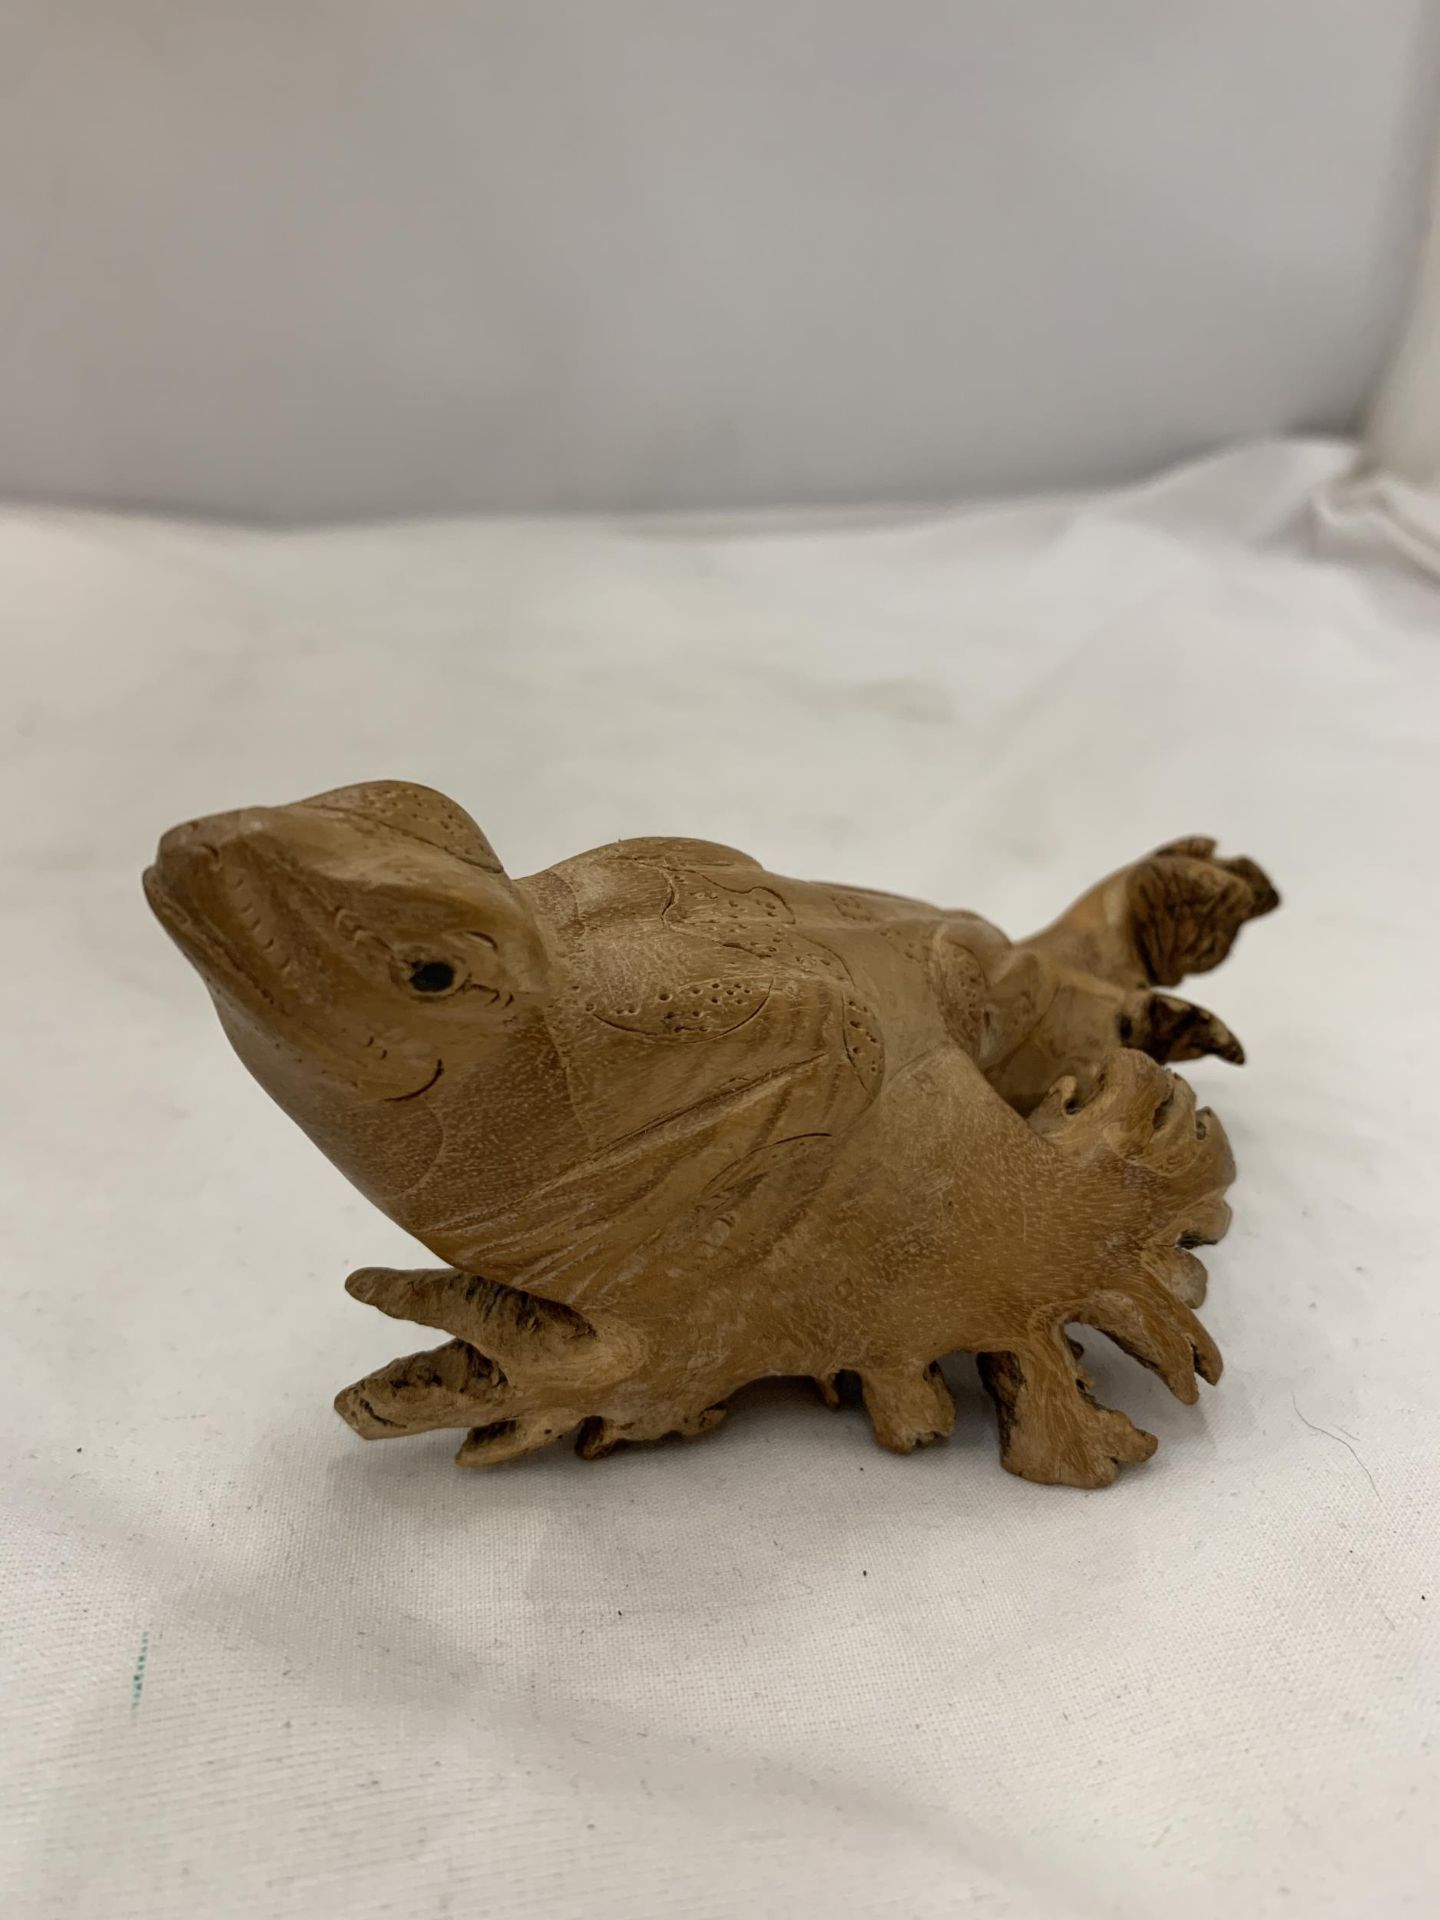 A VINTAGE CARVED DRIFTWOOD WOOD FROG AND LIZARD - Image 6 of 6